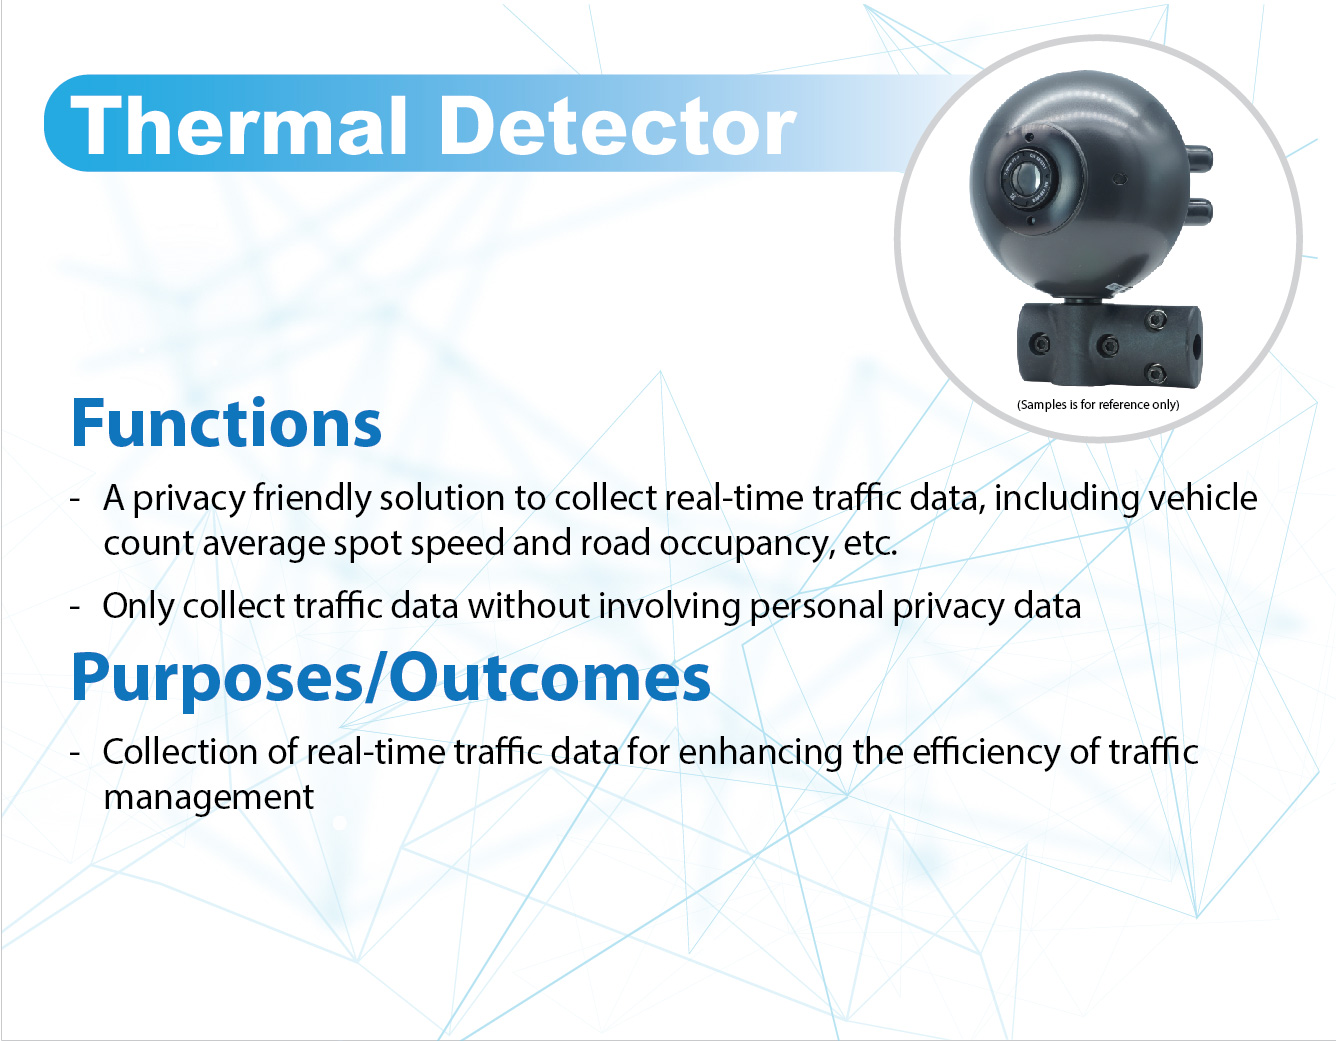 Thermal Detector,
					Functions -
					A privacy friendly solution to collect real-time traffic data, including vehicle count, average spot speed and road occupancy, etc.
					Only collect traffic data without involving personal privacy data.
					
					Purposes/Outcomes - 
					Collection of real-time traffic data for enhancing the efficiency of traffic management.